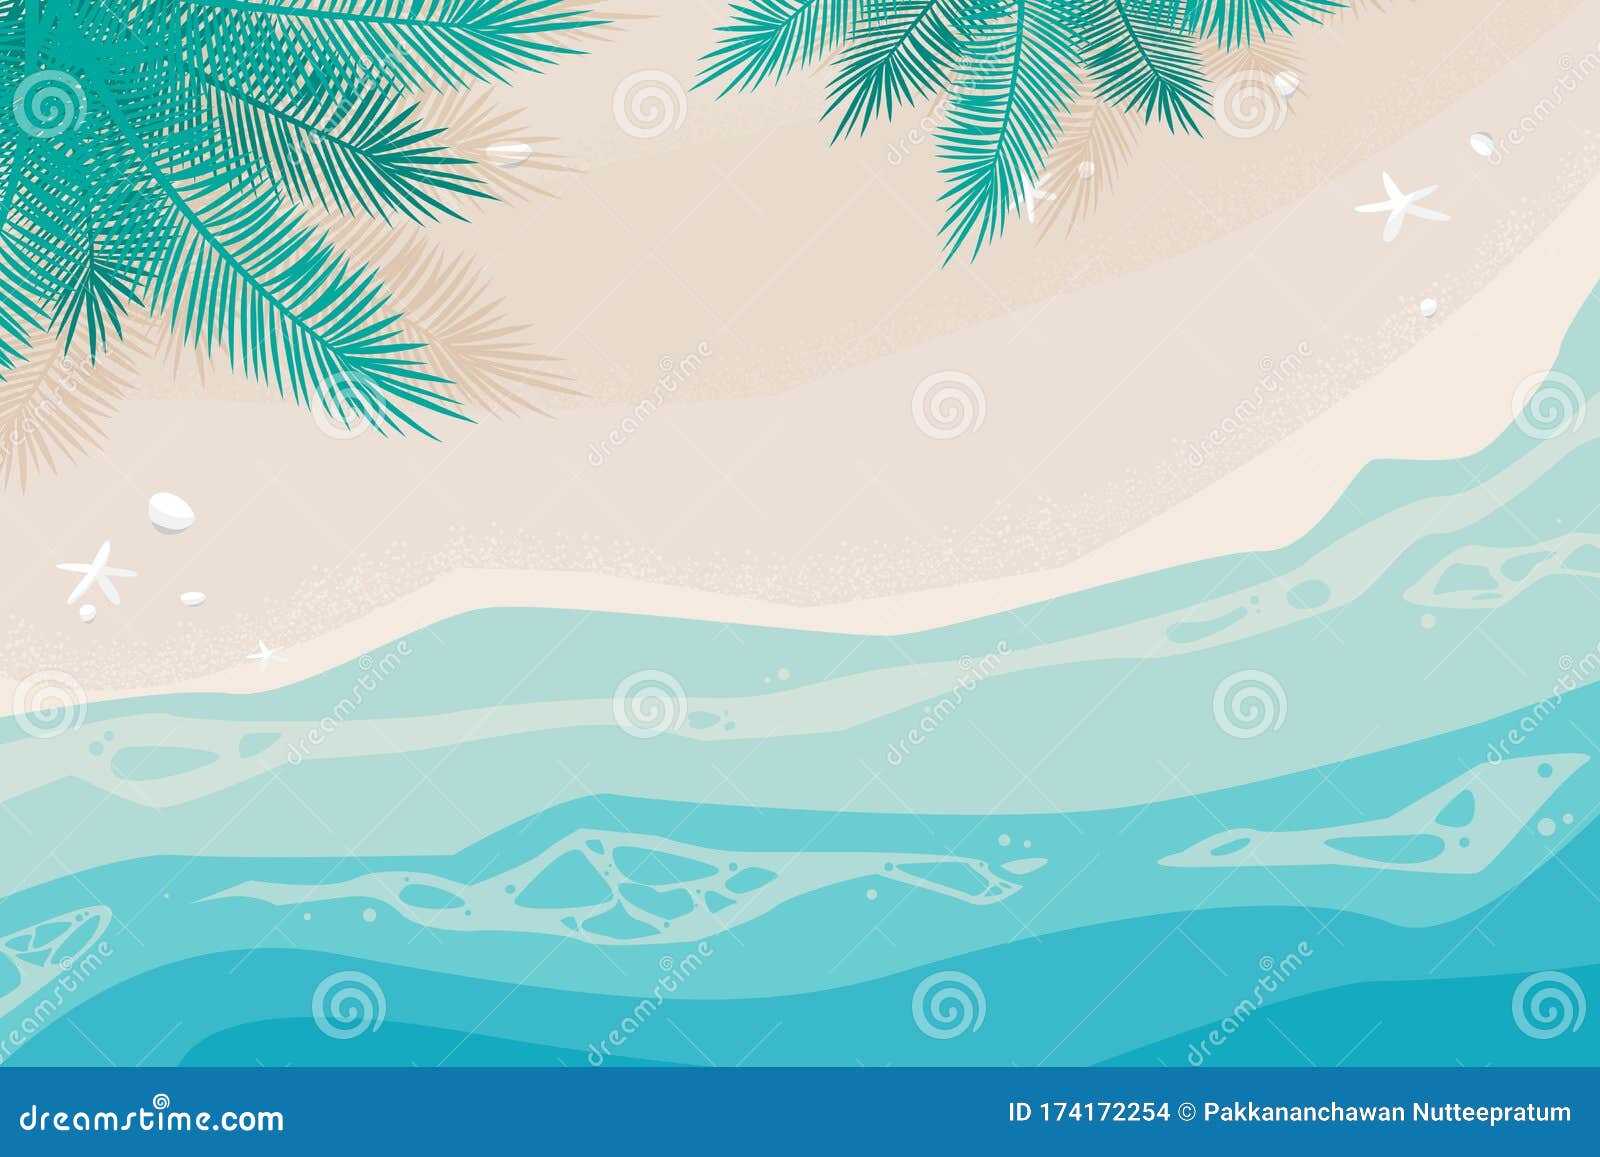 Summer Season Background of the Beach with Coconut Tree, Shell and Starfish  Stock Vector - Illustration of ocean, coast: 174172254